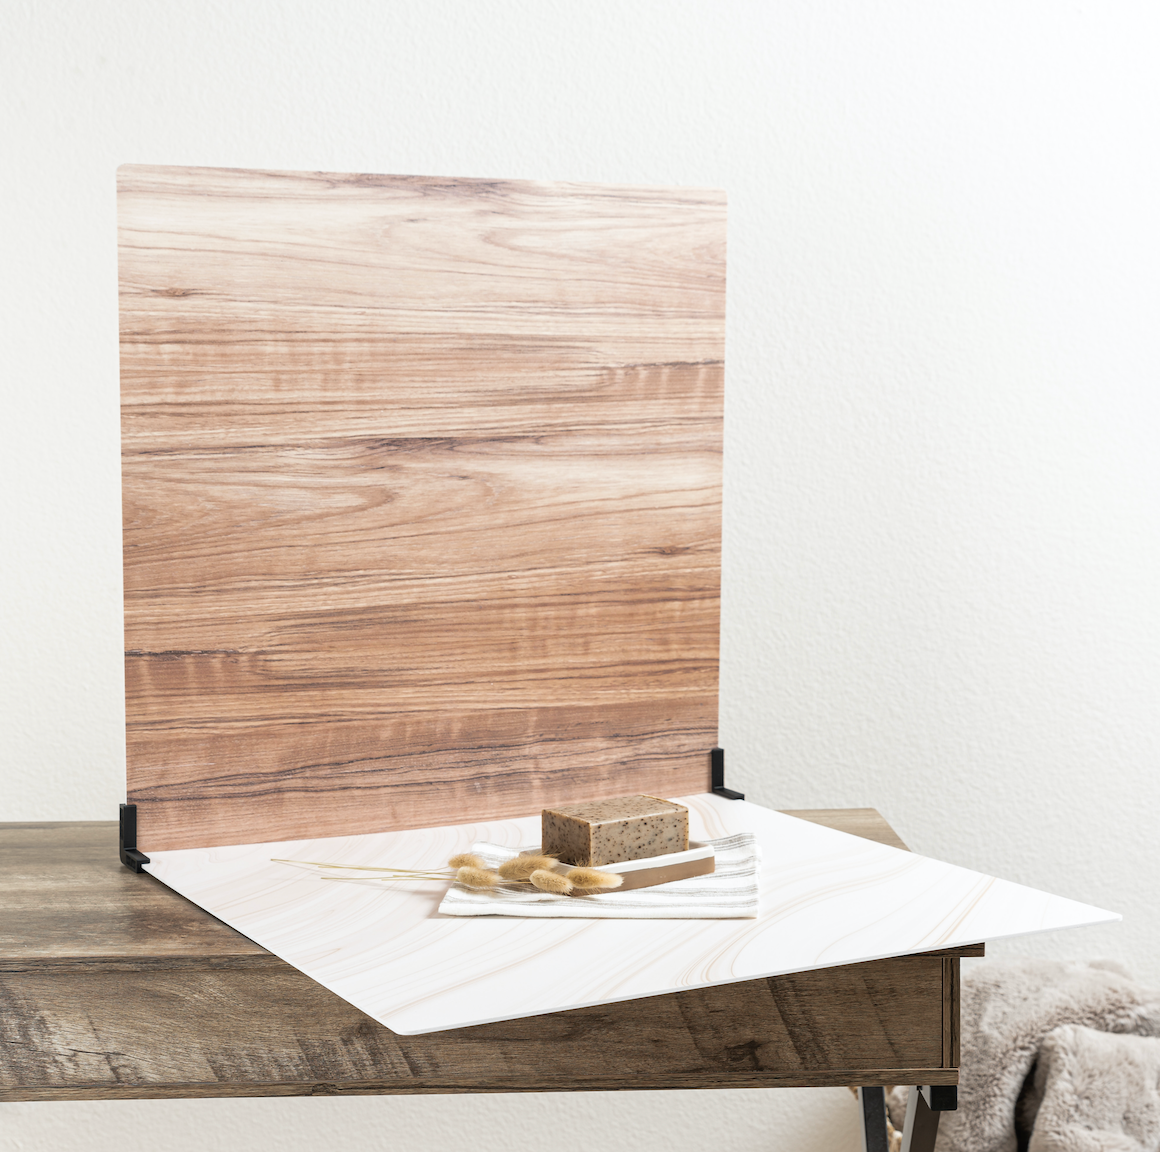 Teak board backdrop replica. Board Backdrop and Vinyl Backdrop for Food and Product Photography.